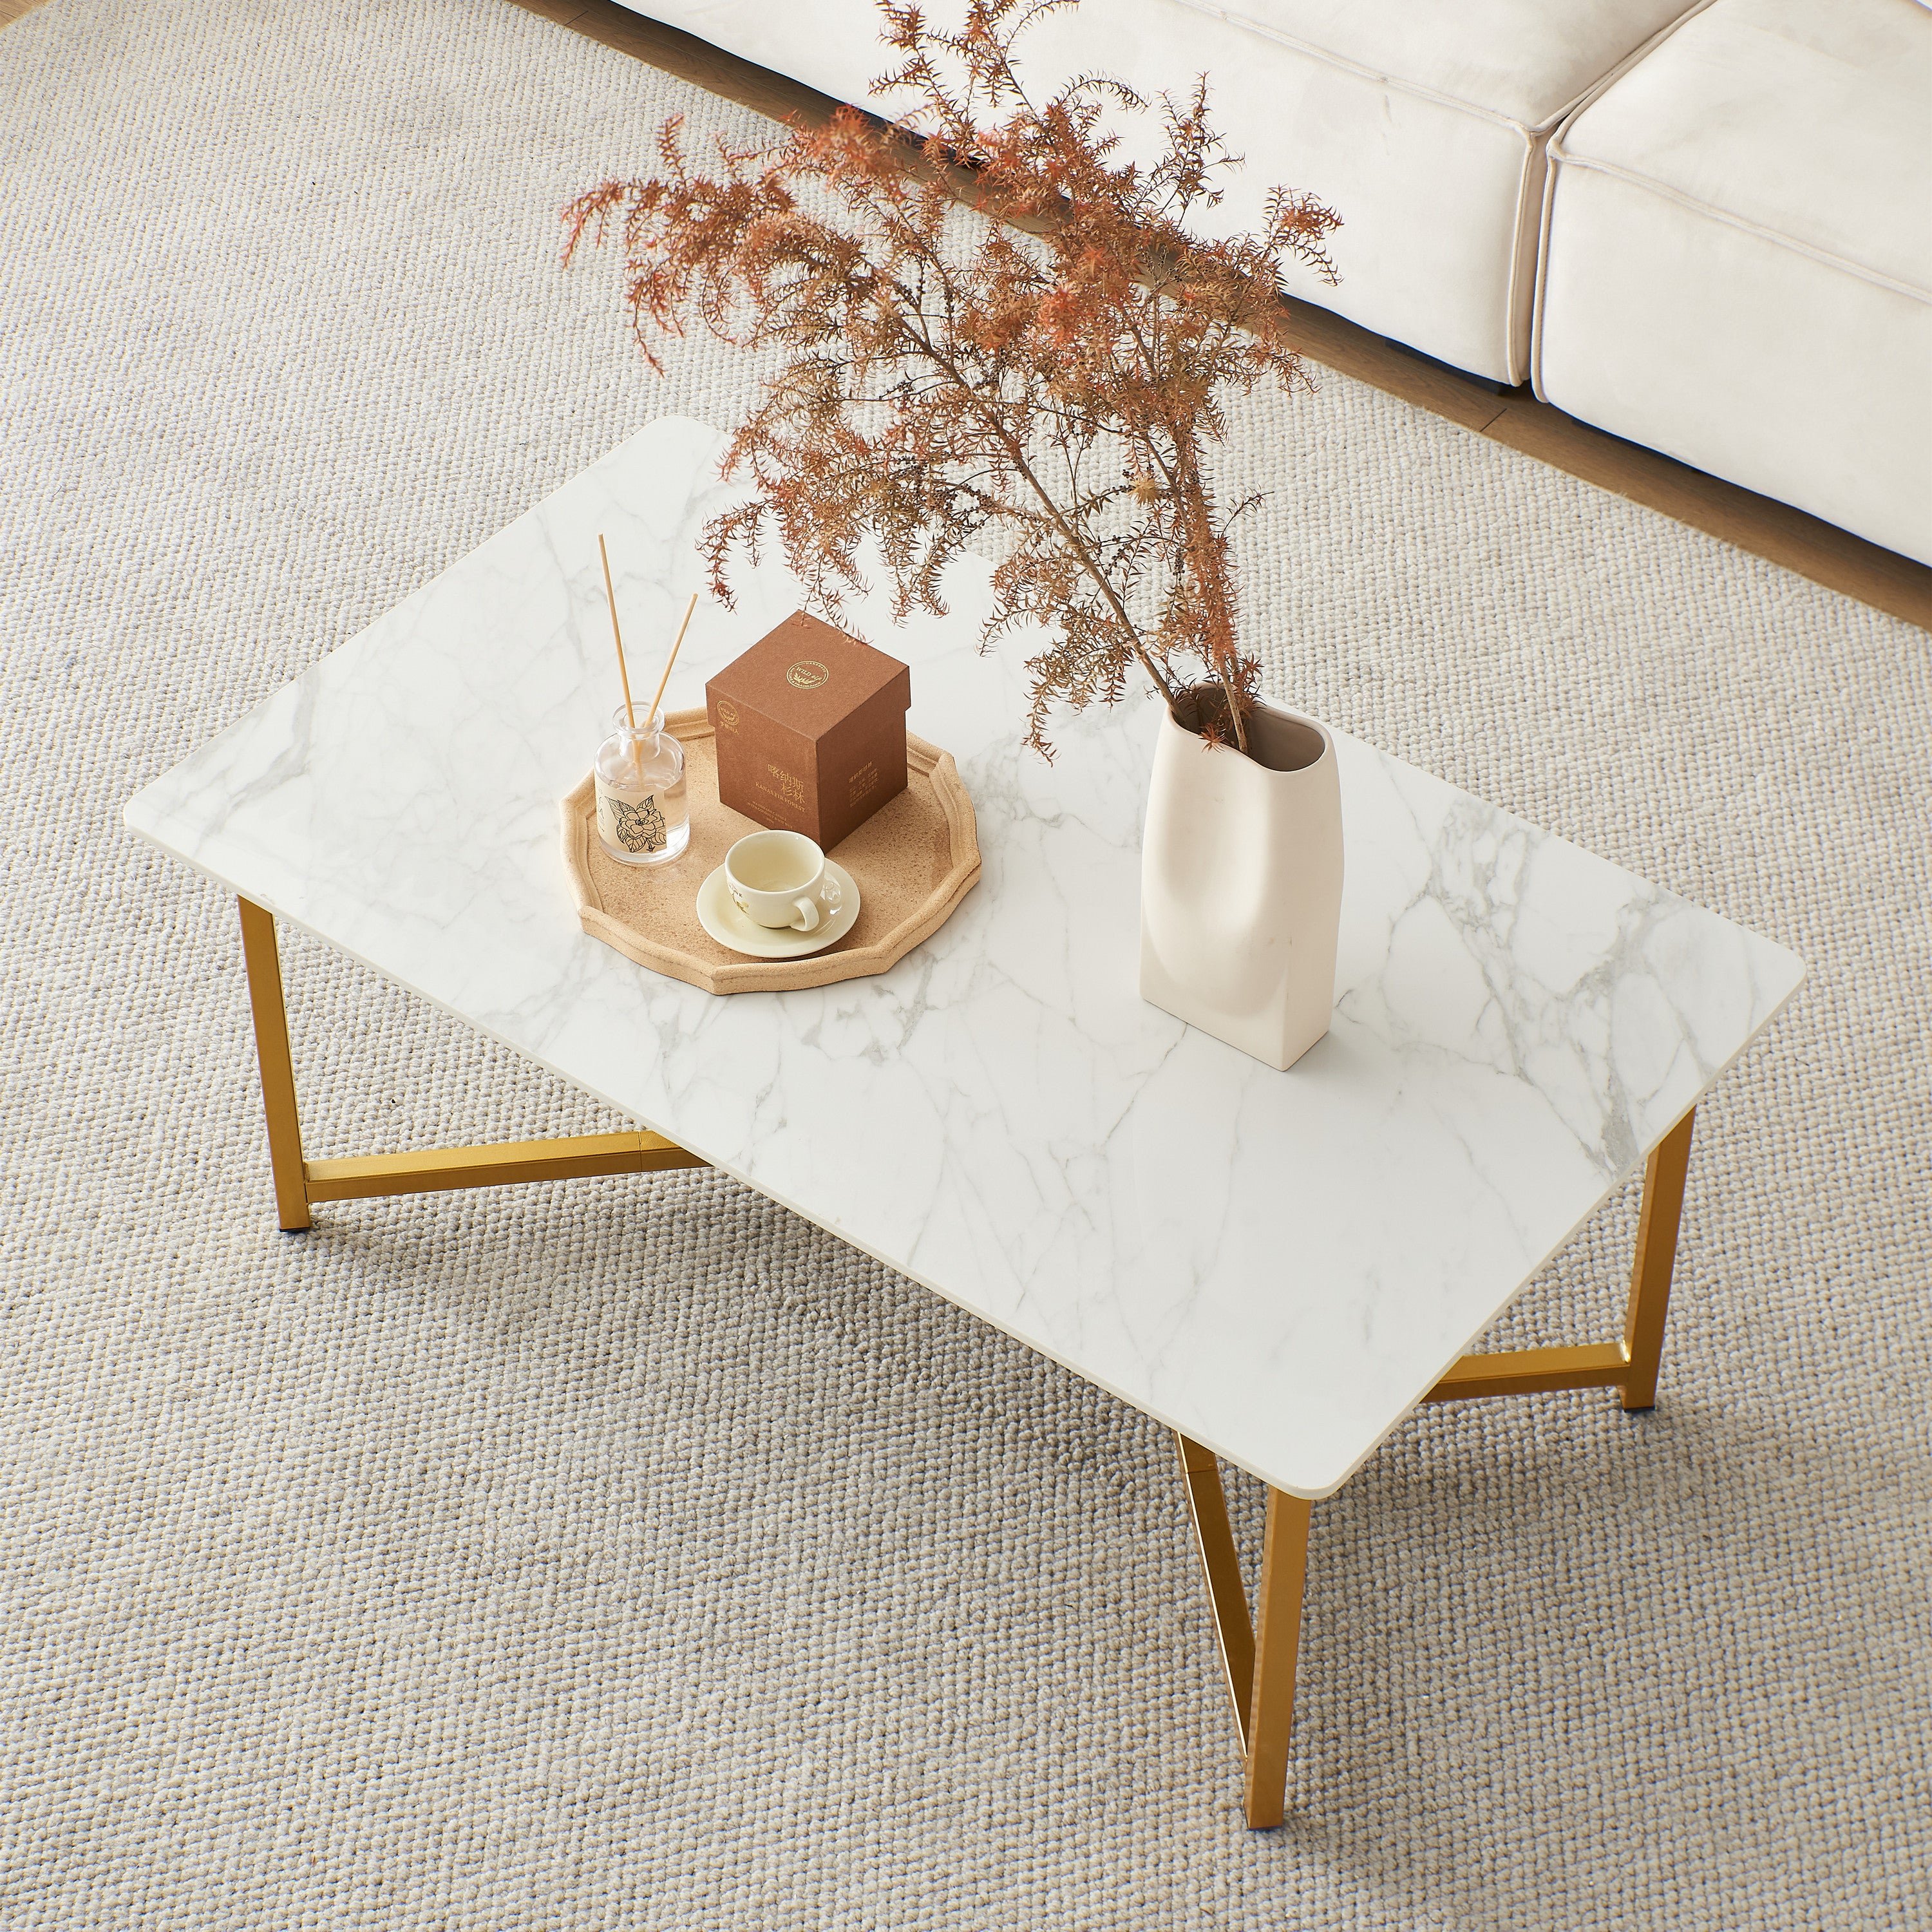 Sintered Stone Rectangle Coffee Table